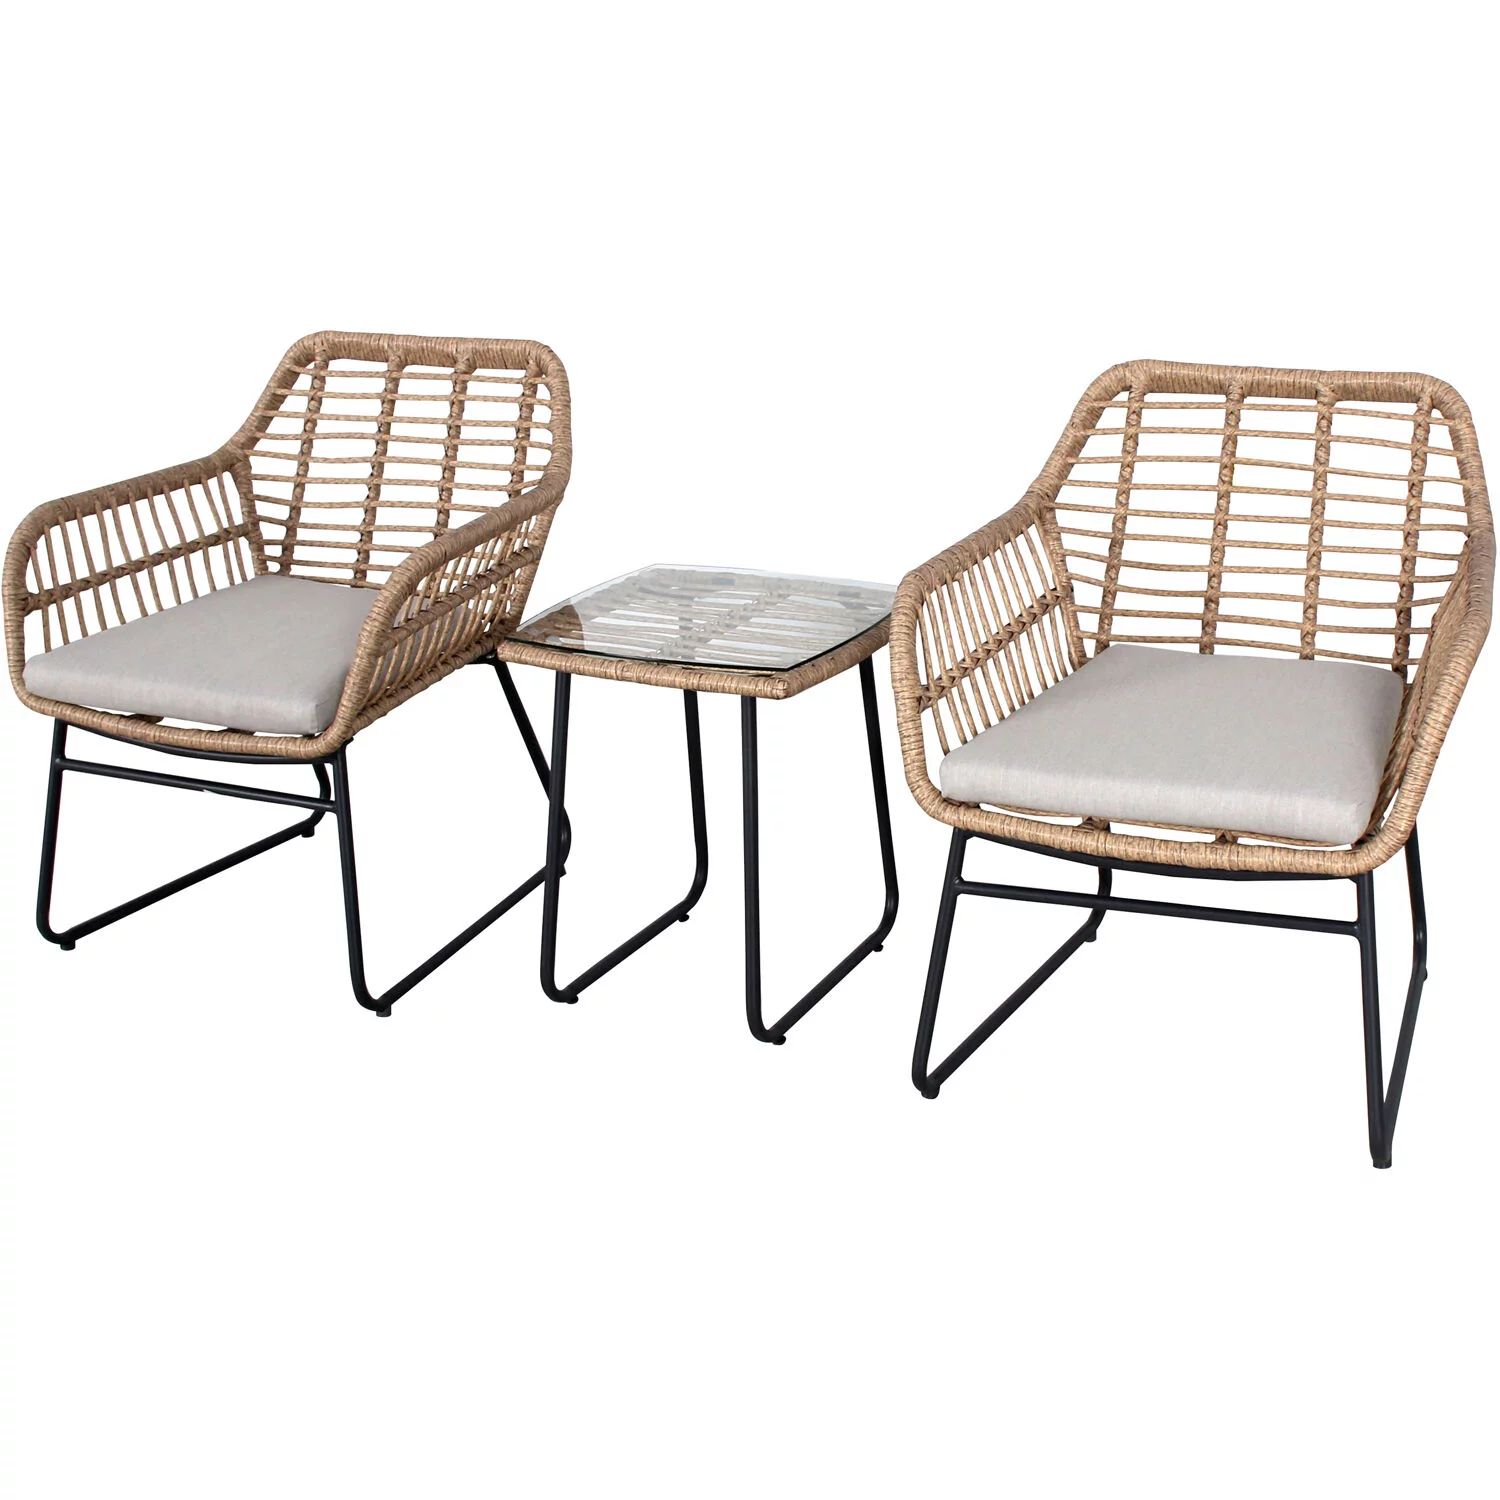 Mod Mia 3-Piece Bistro Chat Set with 2 Hand-Woven Wicker Chairs, Grey Cushions, and Glass Top Sid... | Walmart (US)